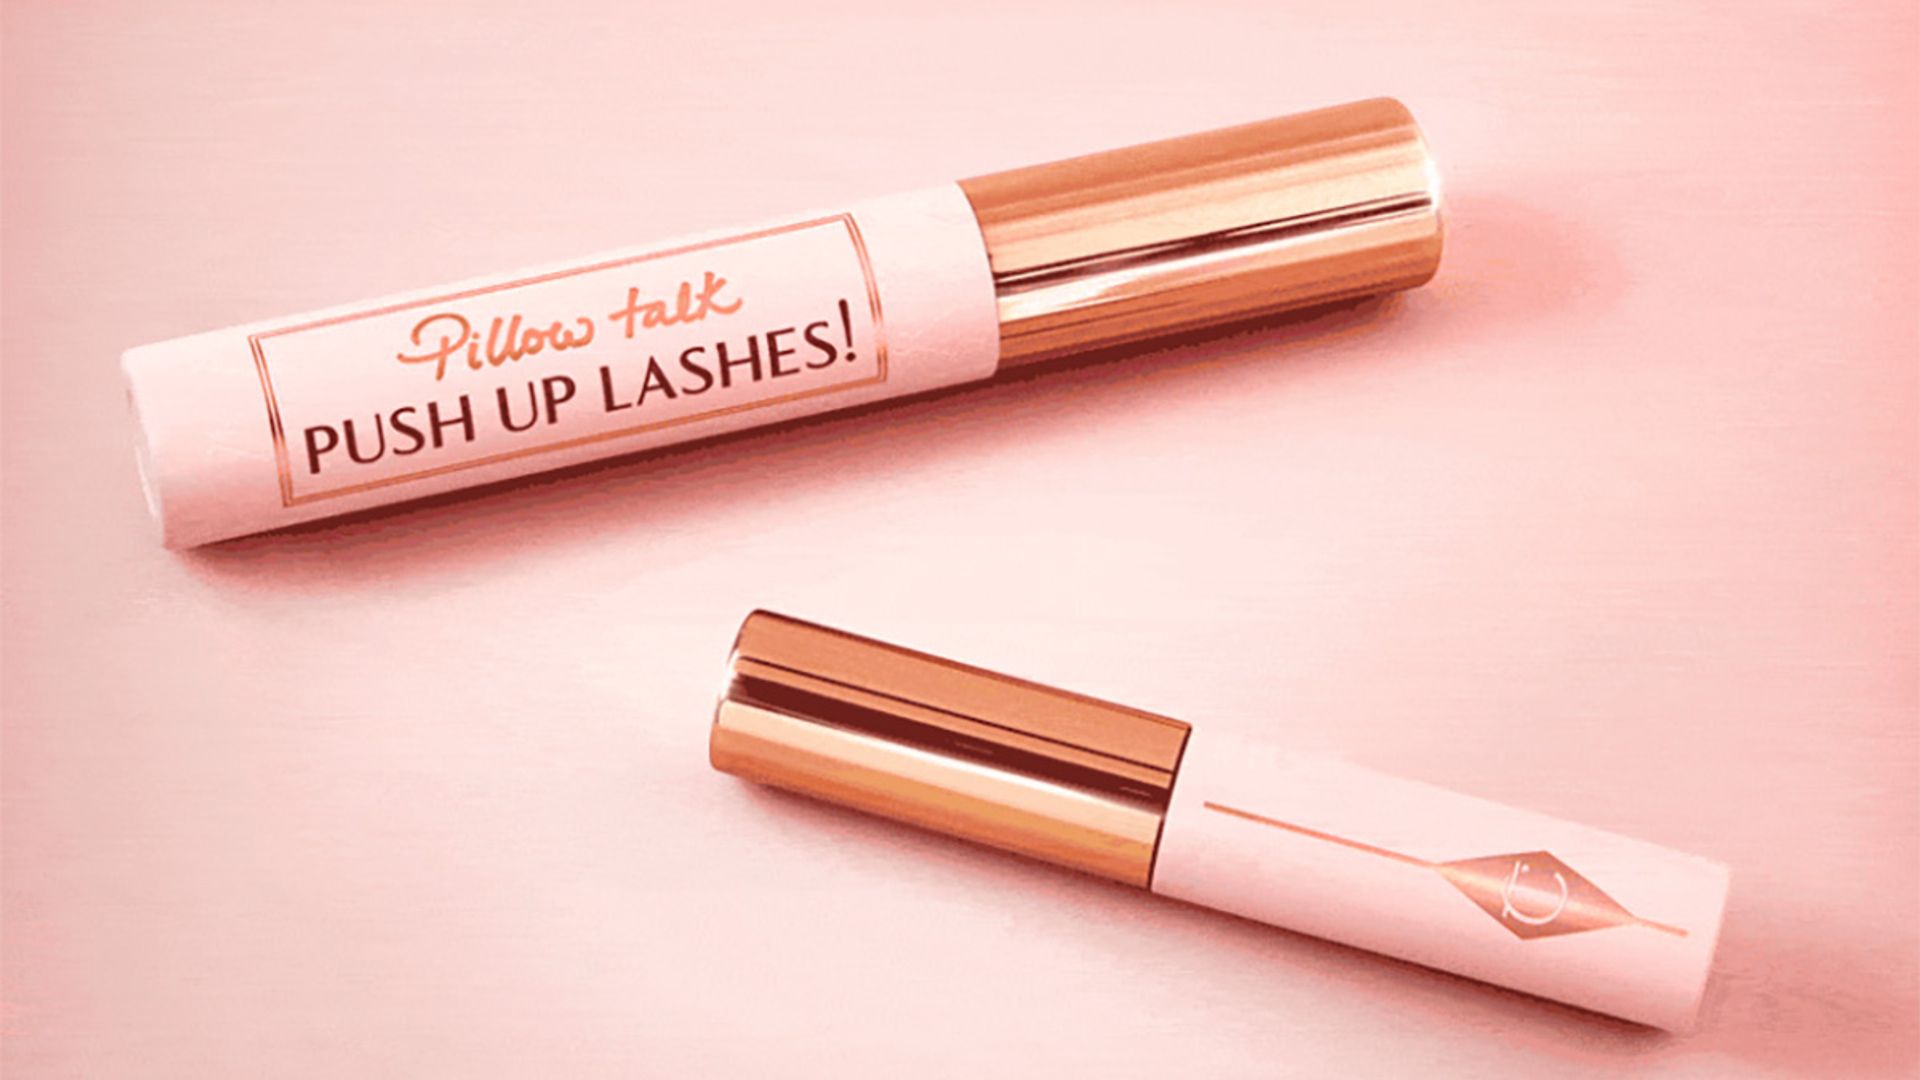 I tried the new Pillow Talk Push Up Lashes! mascara to see if it's really worth the hype - here's my honest opinion 